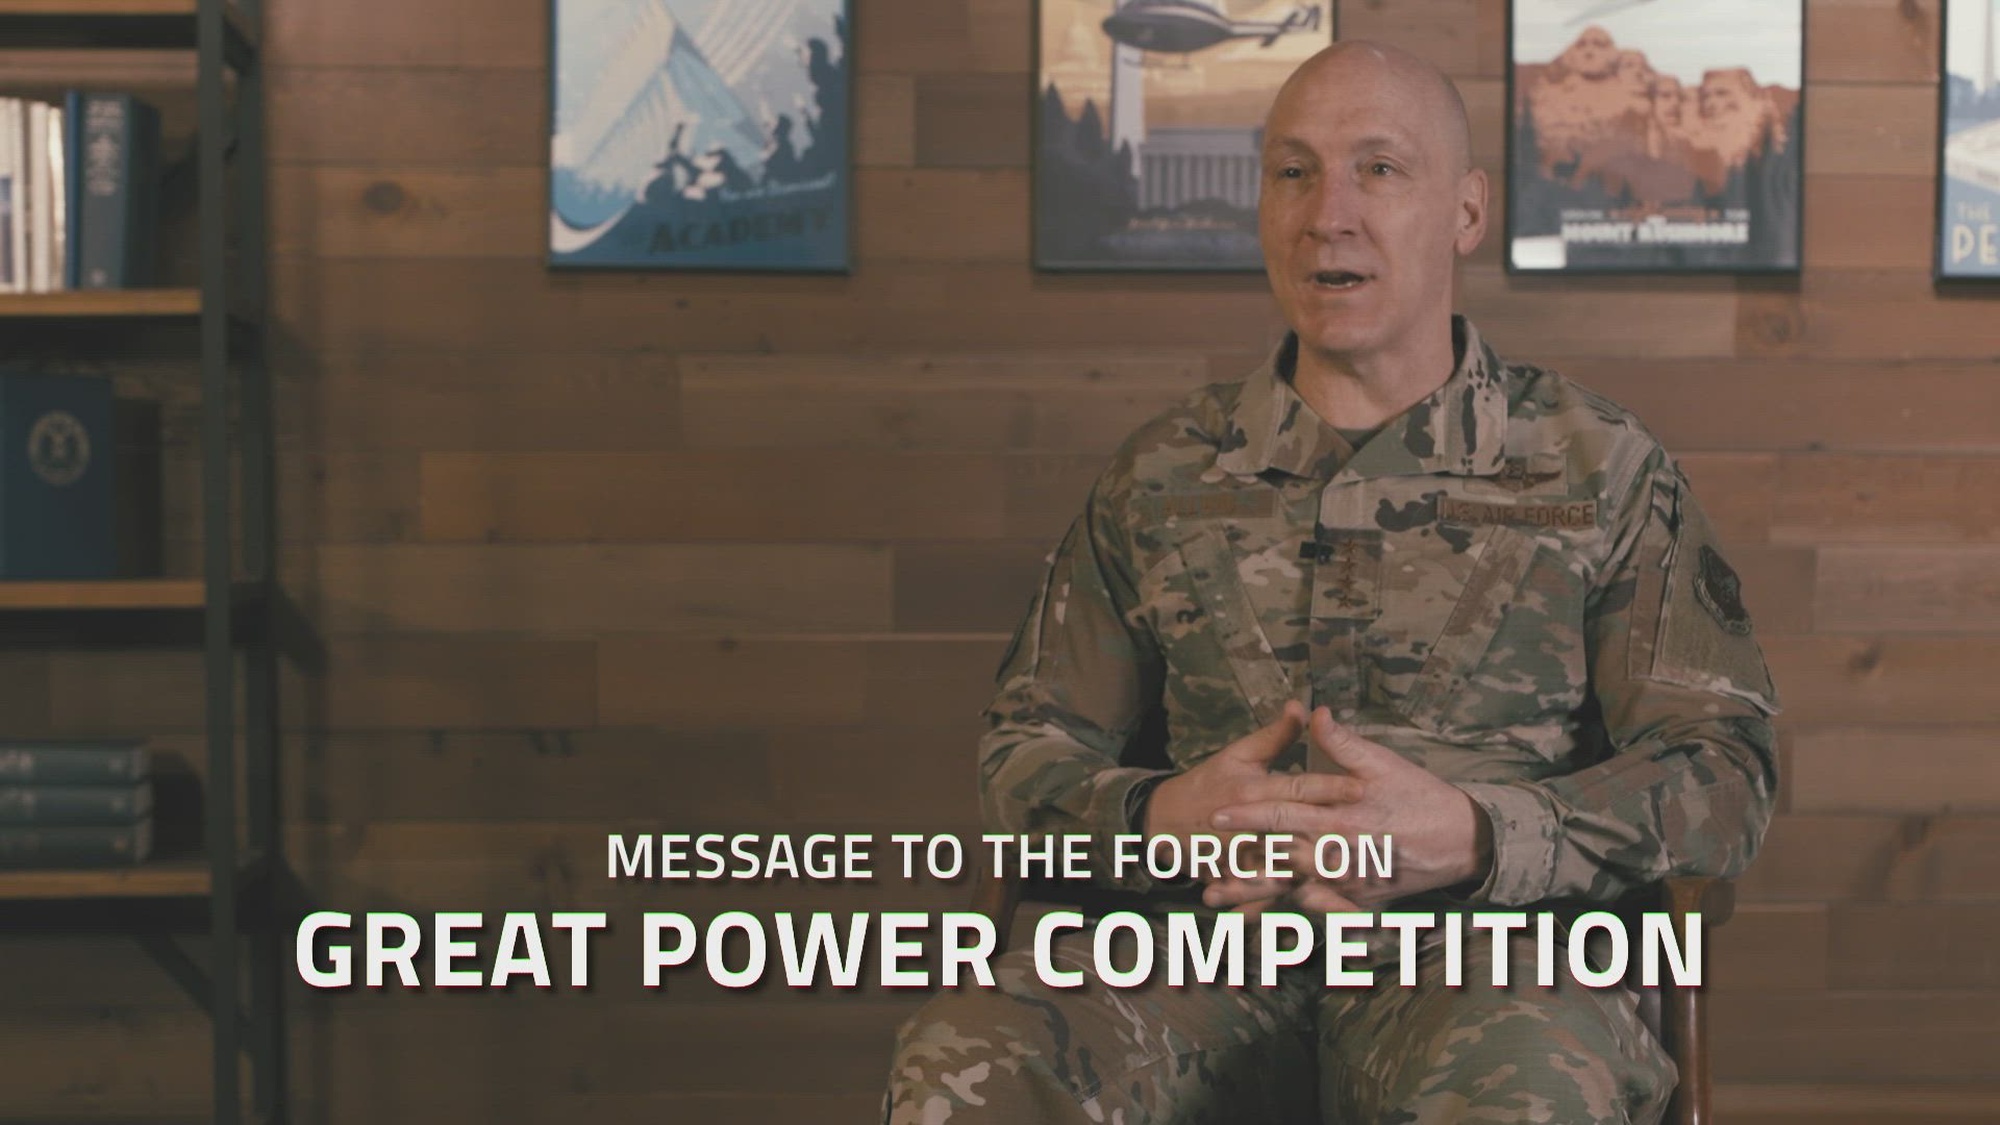 Message To The Force on GPC from Air Force Chief of Staff Gen. David Allvin. #reoptimization #DAFGPC